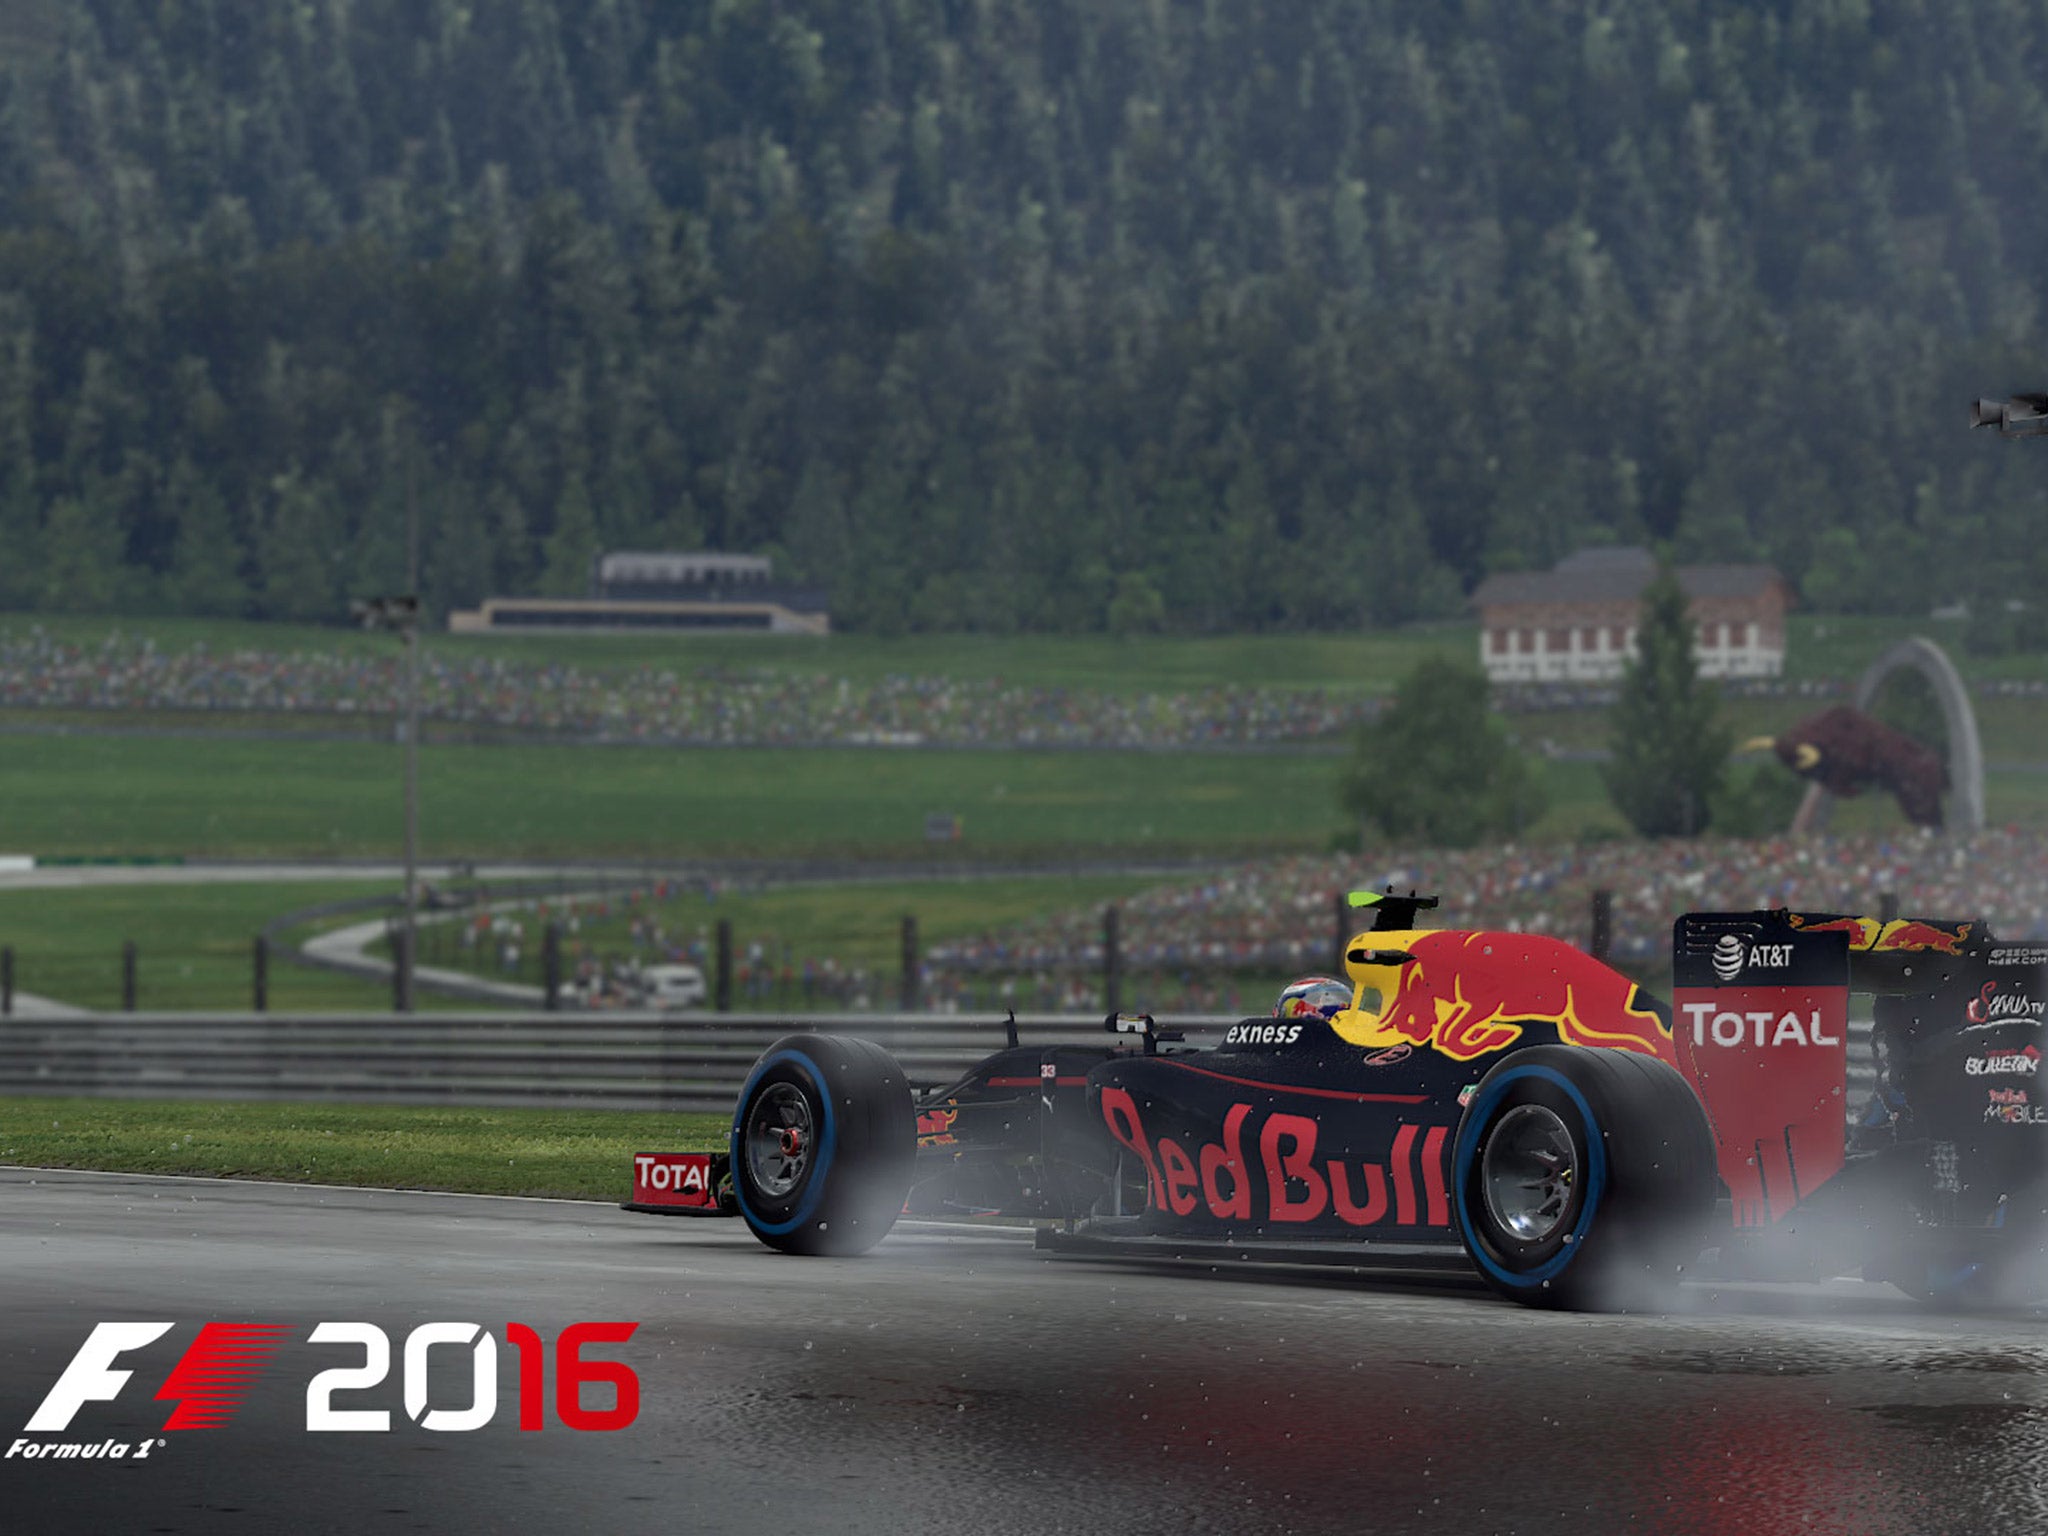 Codemasters have released their latest instalment of the F1 franchise